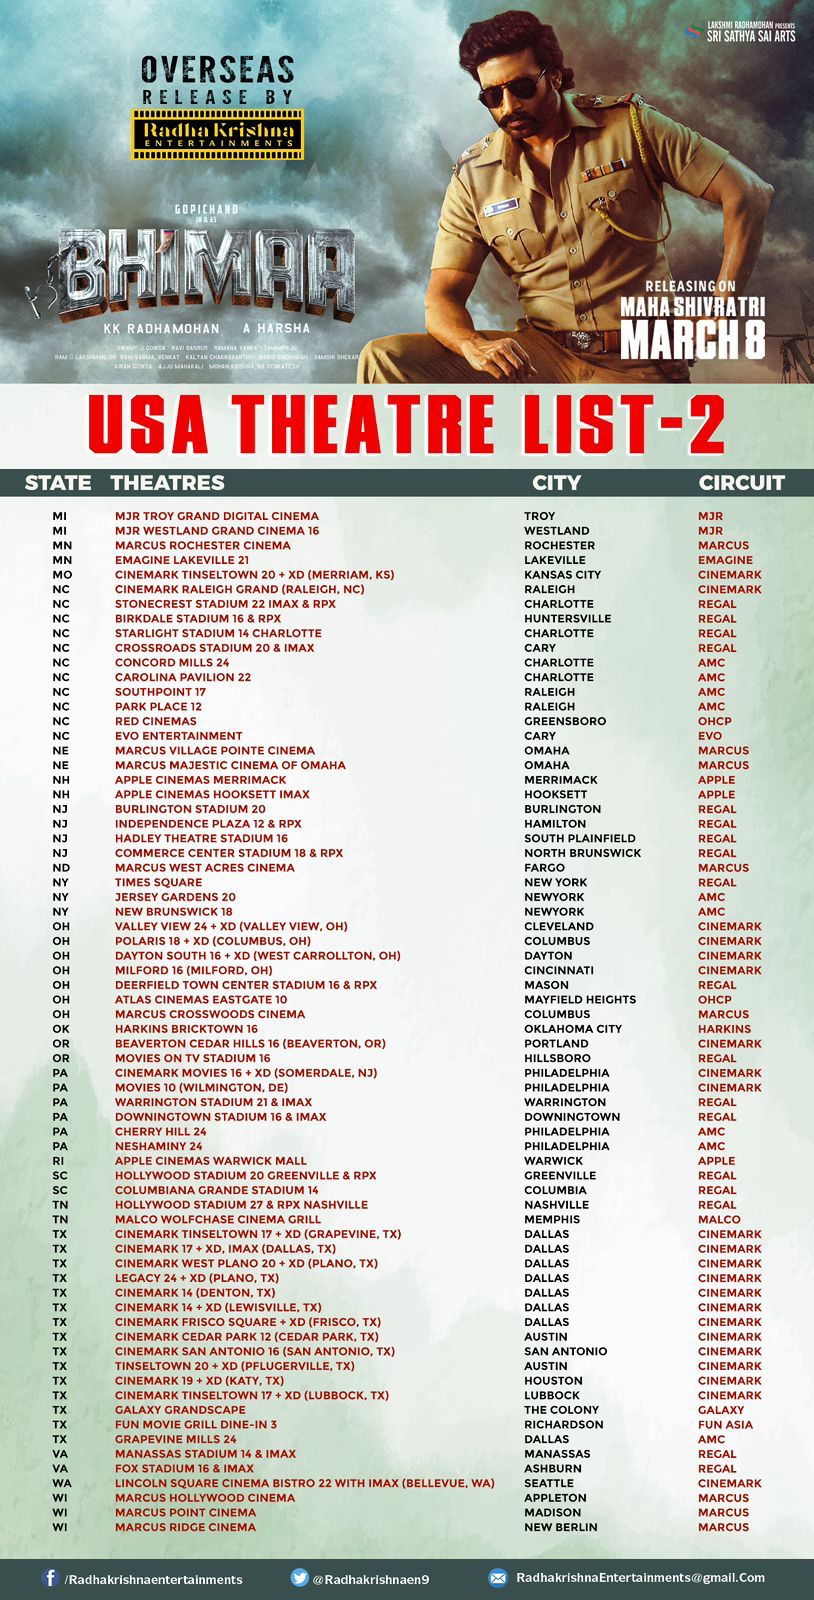 Bhimaa On March 8: Here Is The Final List Of Theatres In Usa!